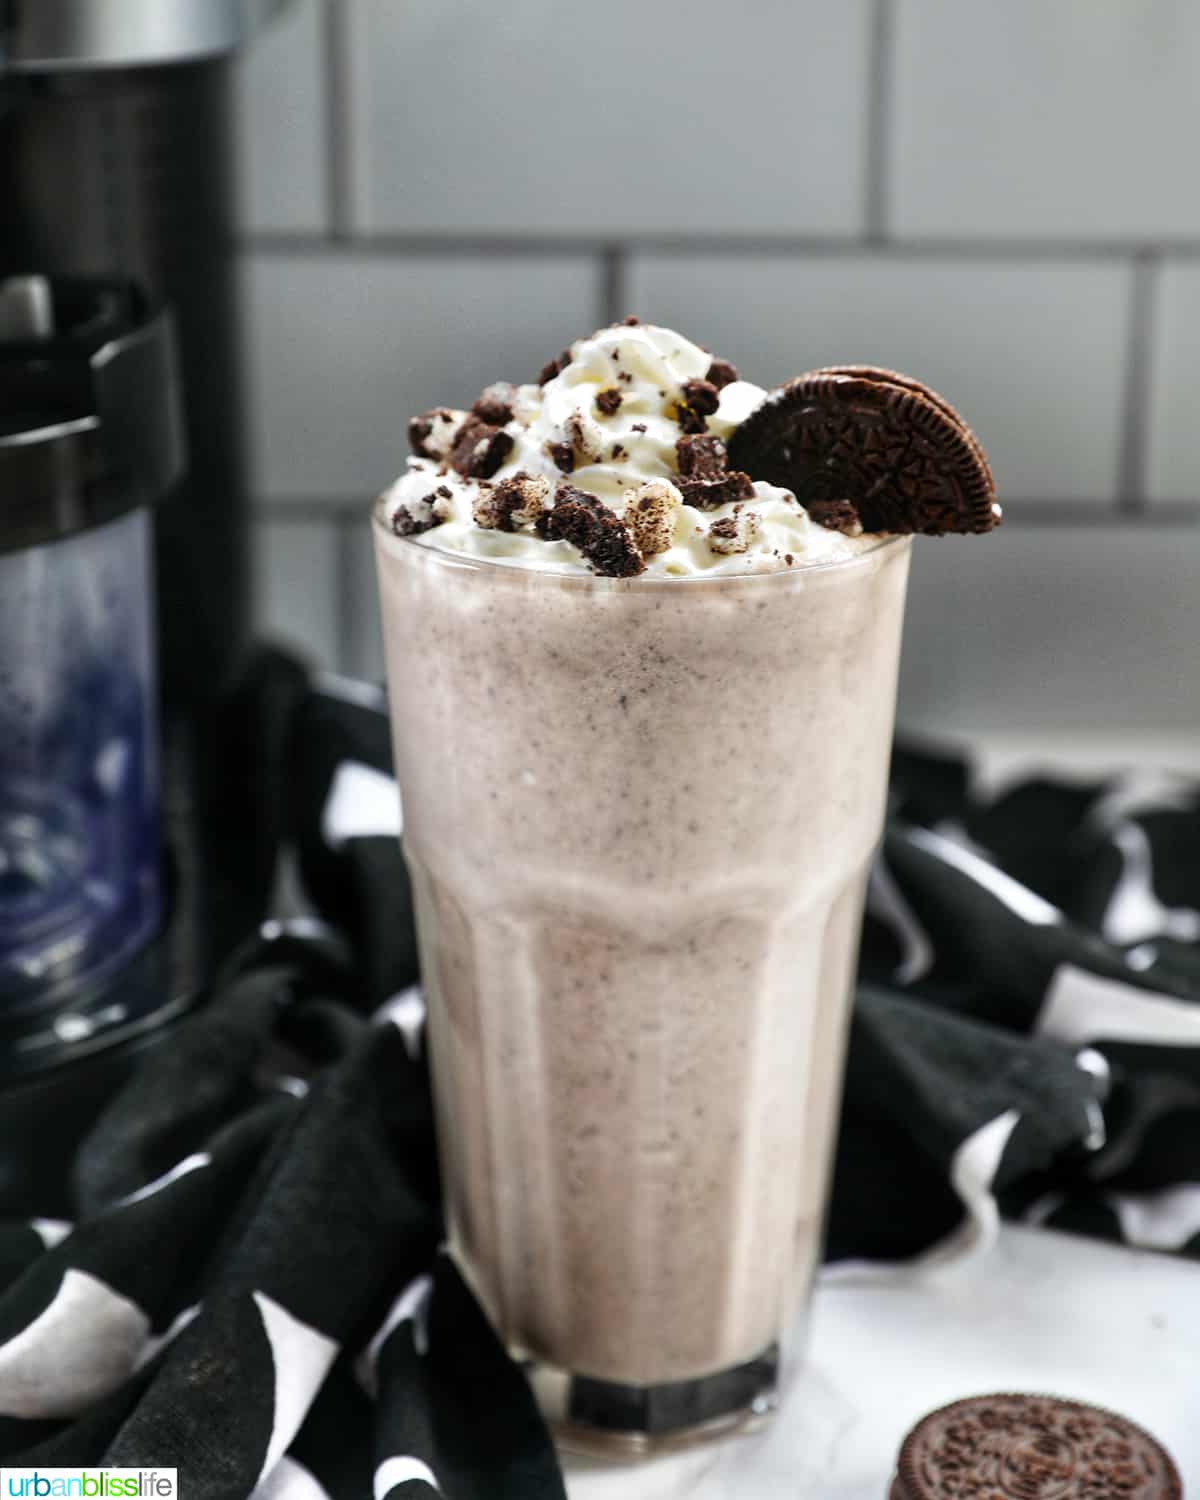 Cookies & Cream
Milkshake in a tall glass with whipped cream topping and crushed Oreo cookies on top.